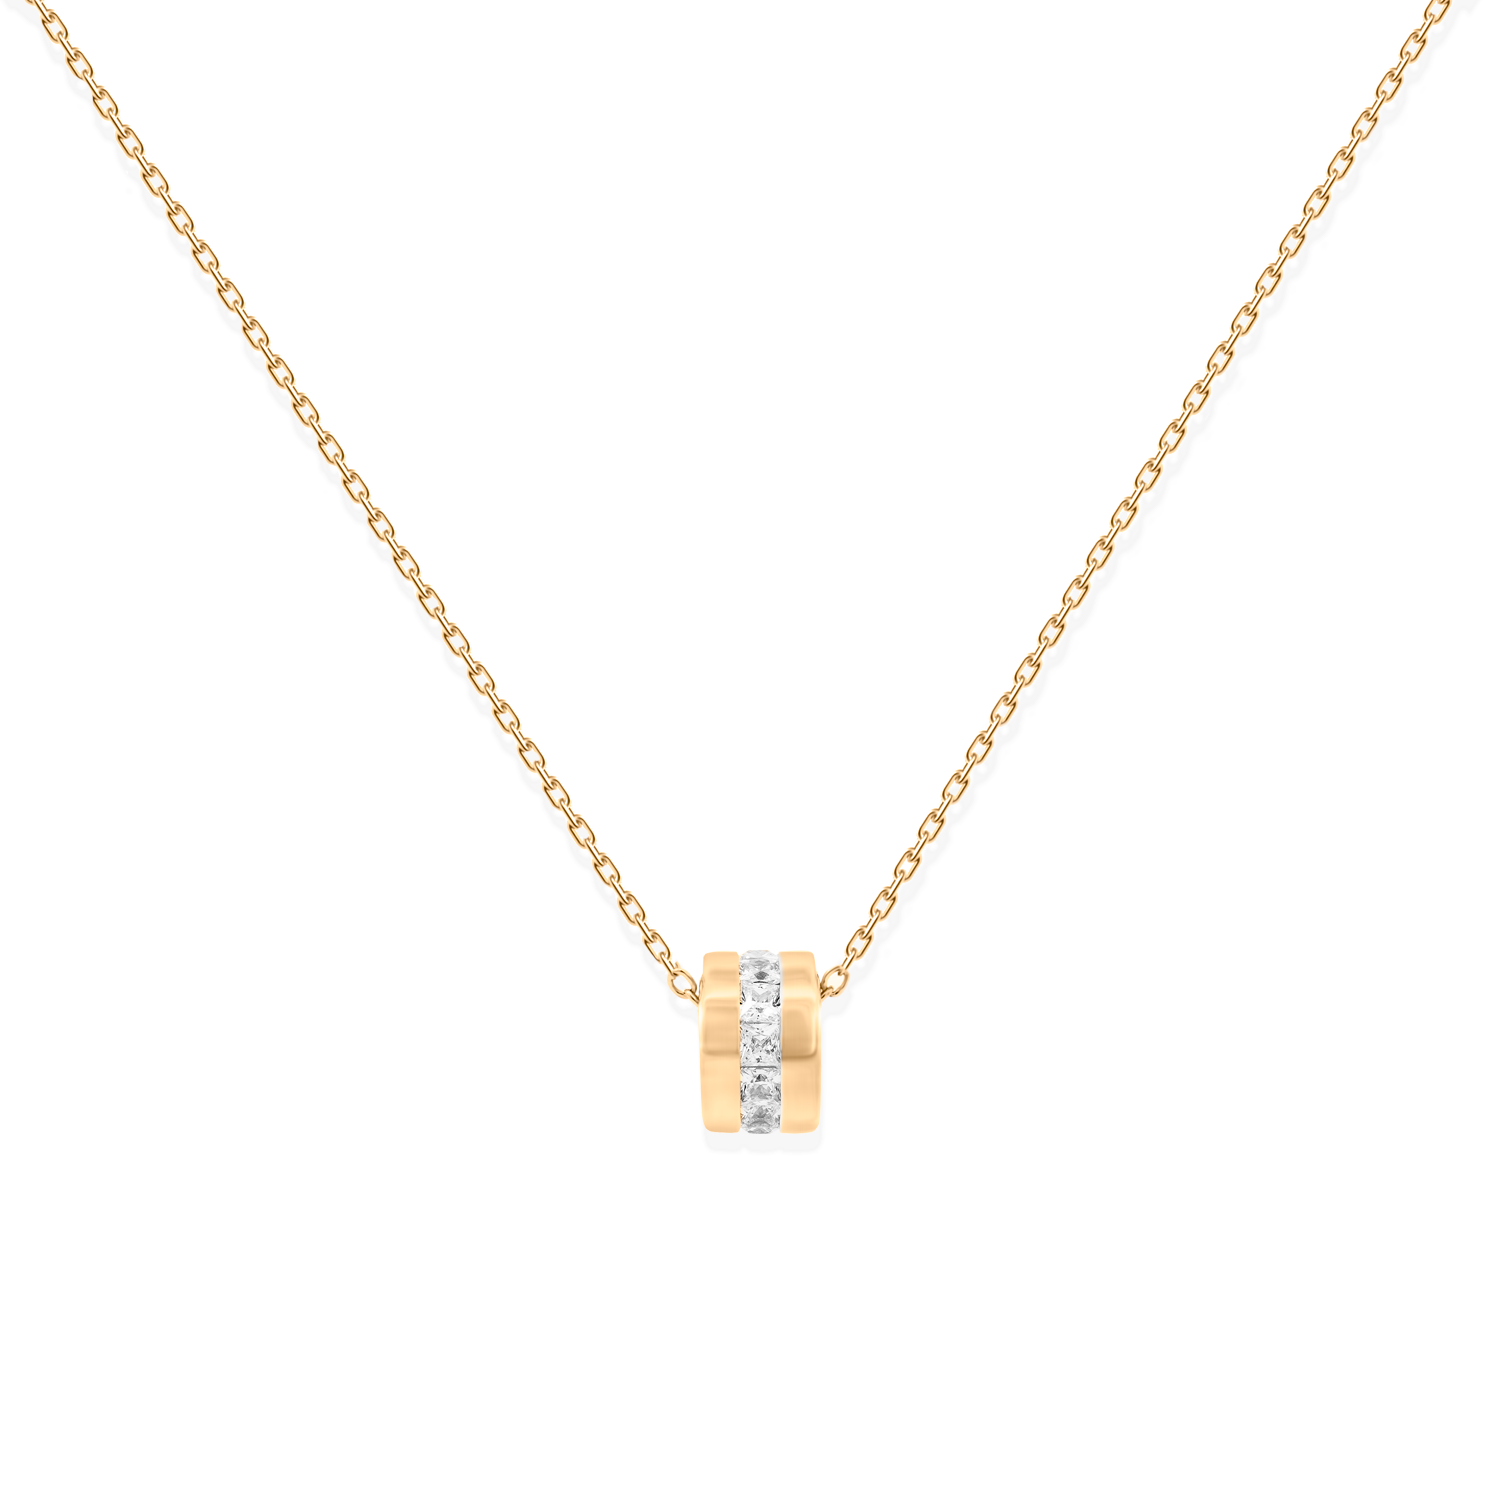 Minimalist and classic necklace in gold with cubic zirconia